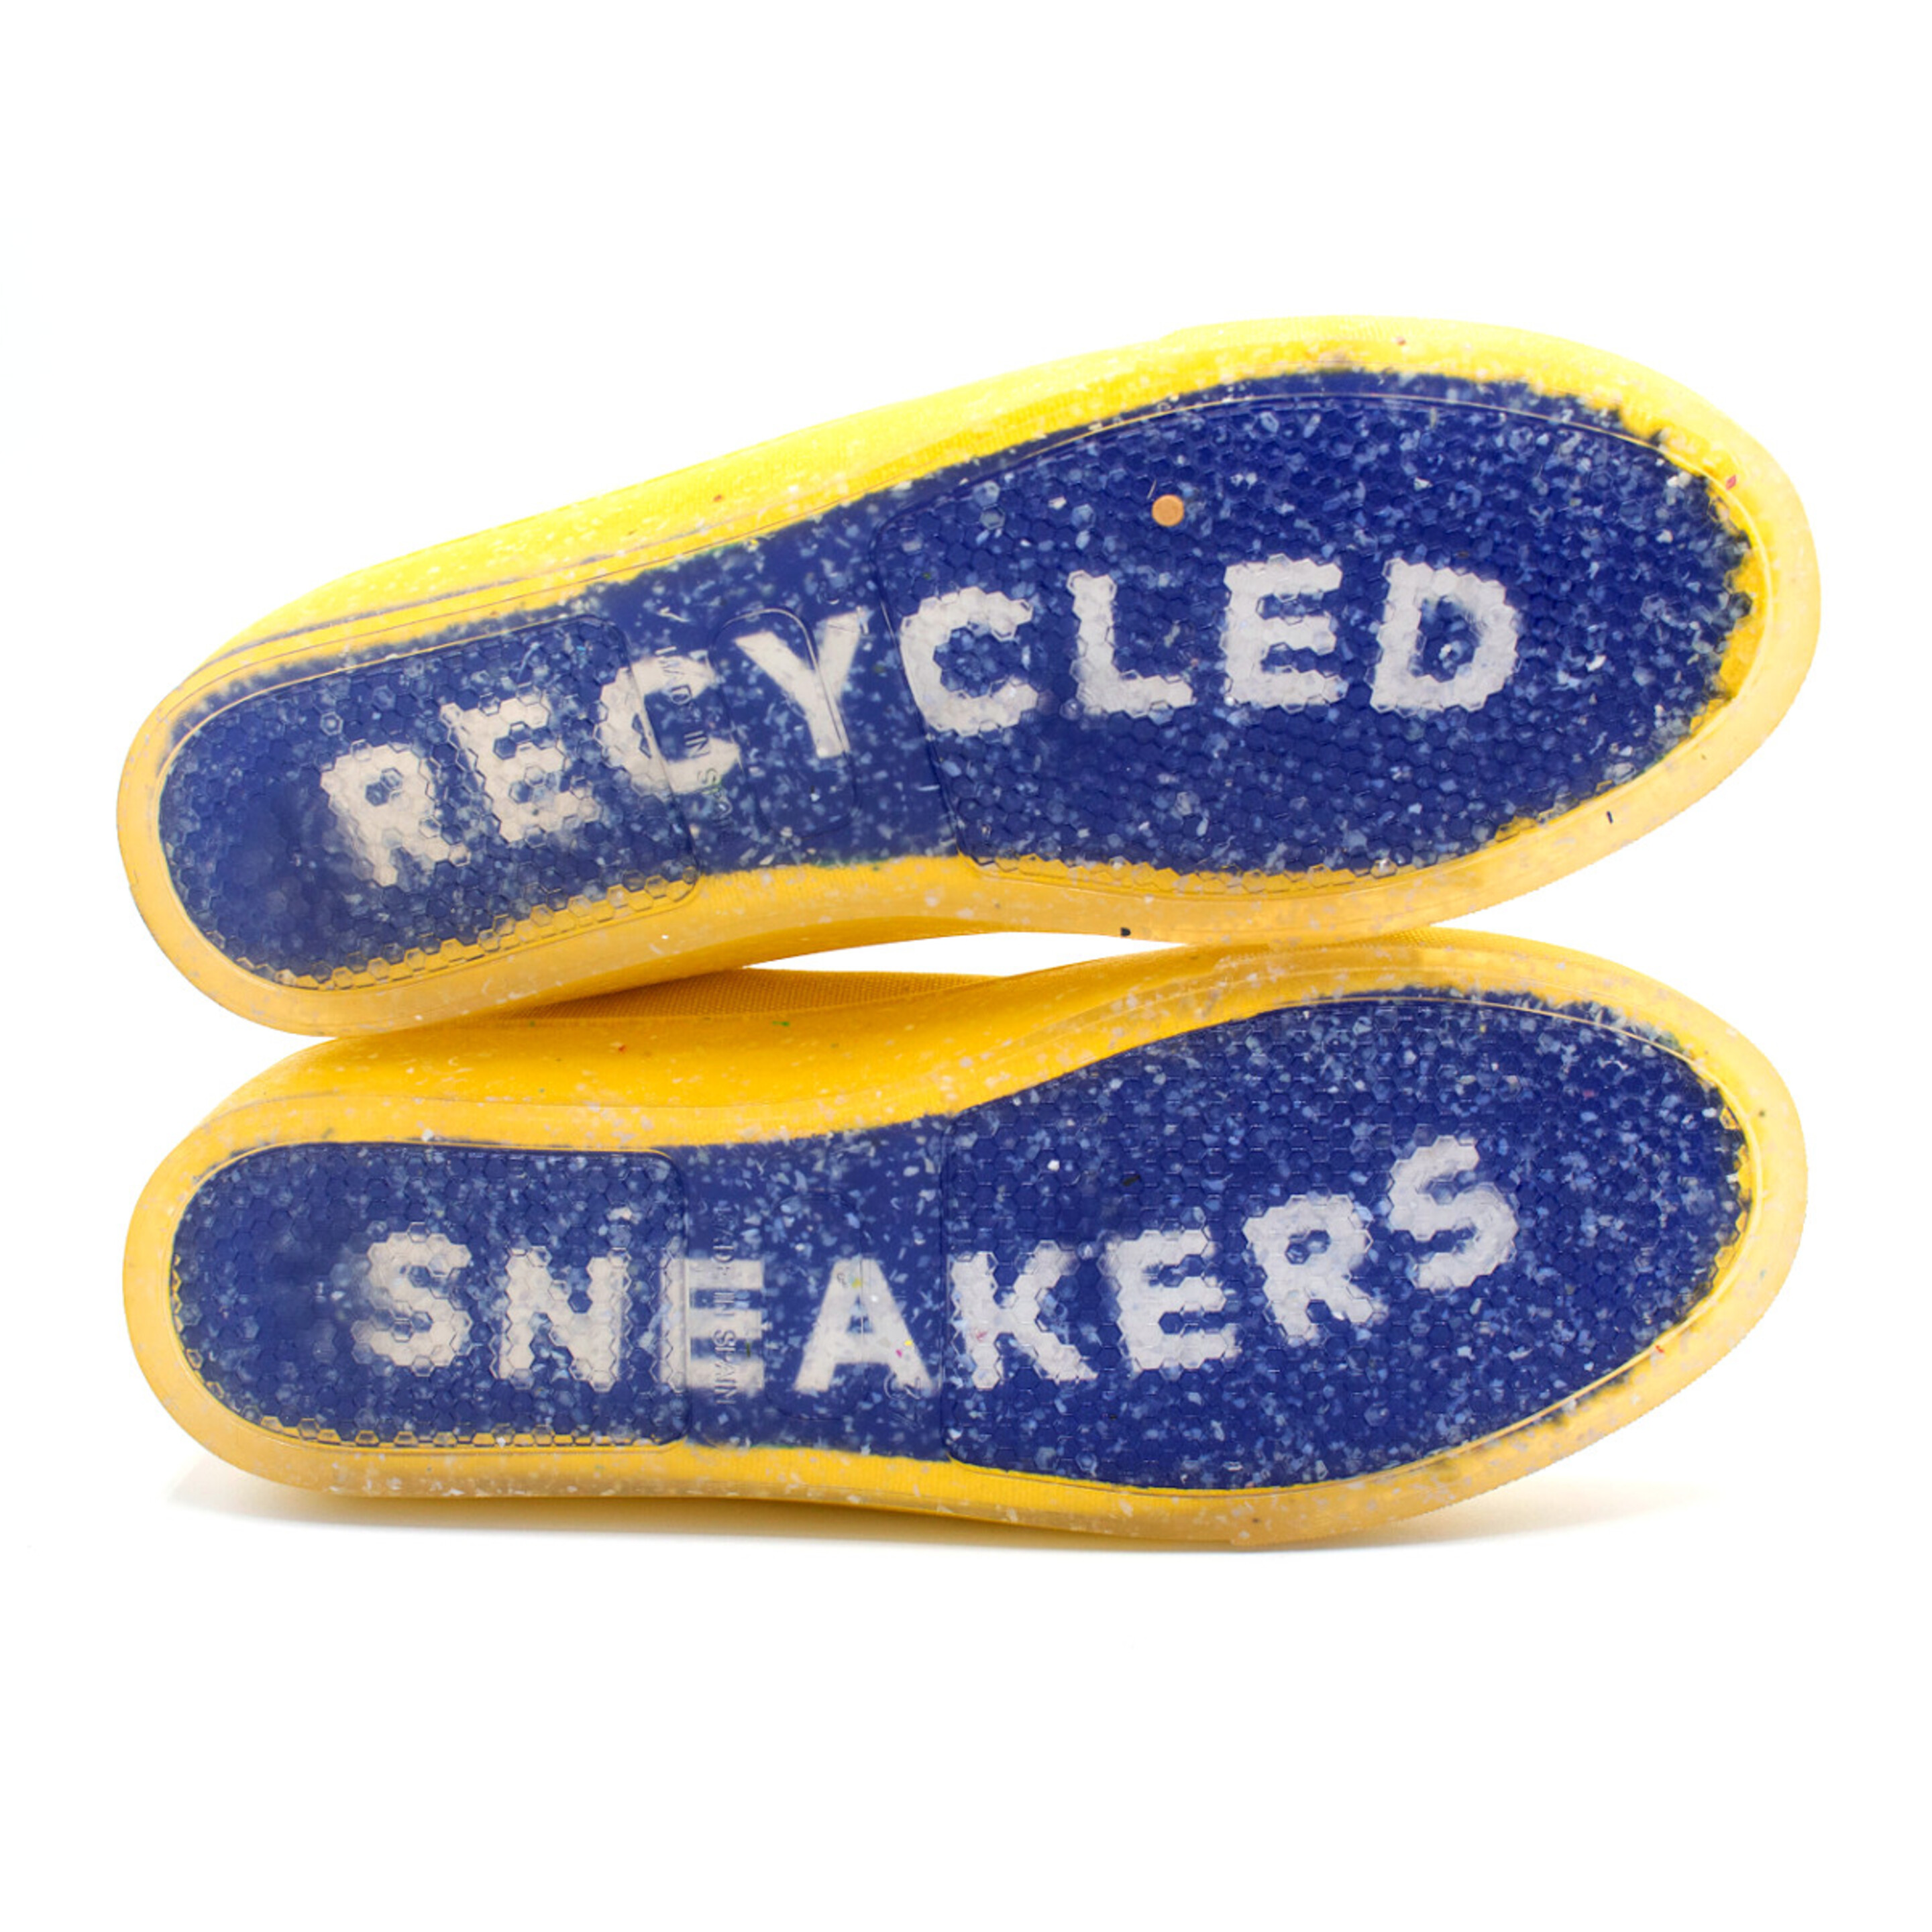 Sneaker Recykers Candem - amarillo - Casual Mujer  MKP